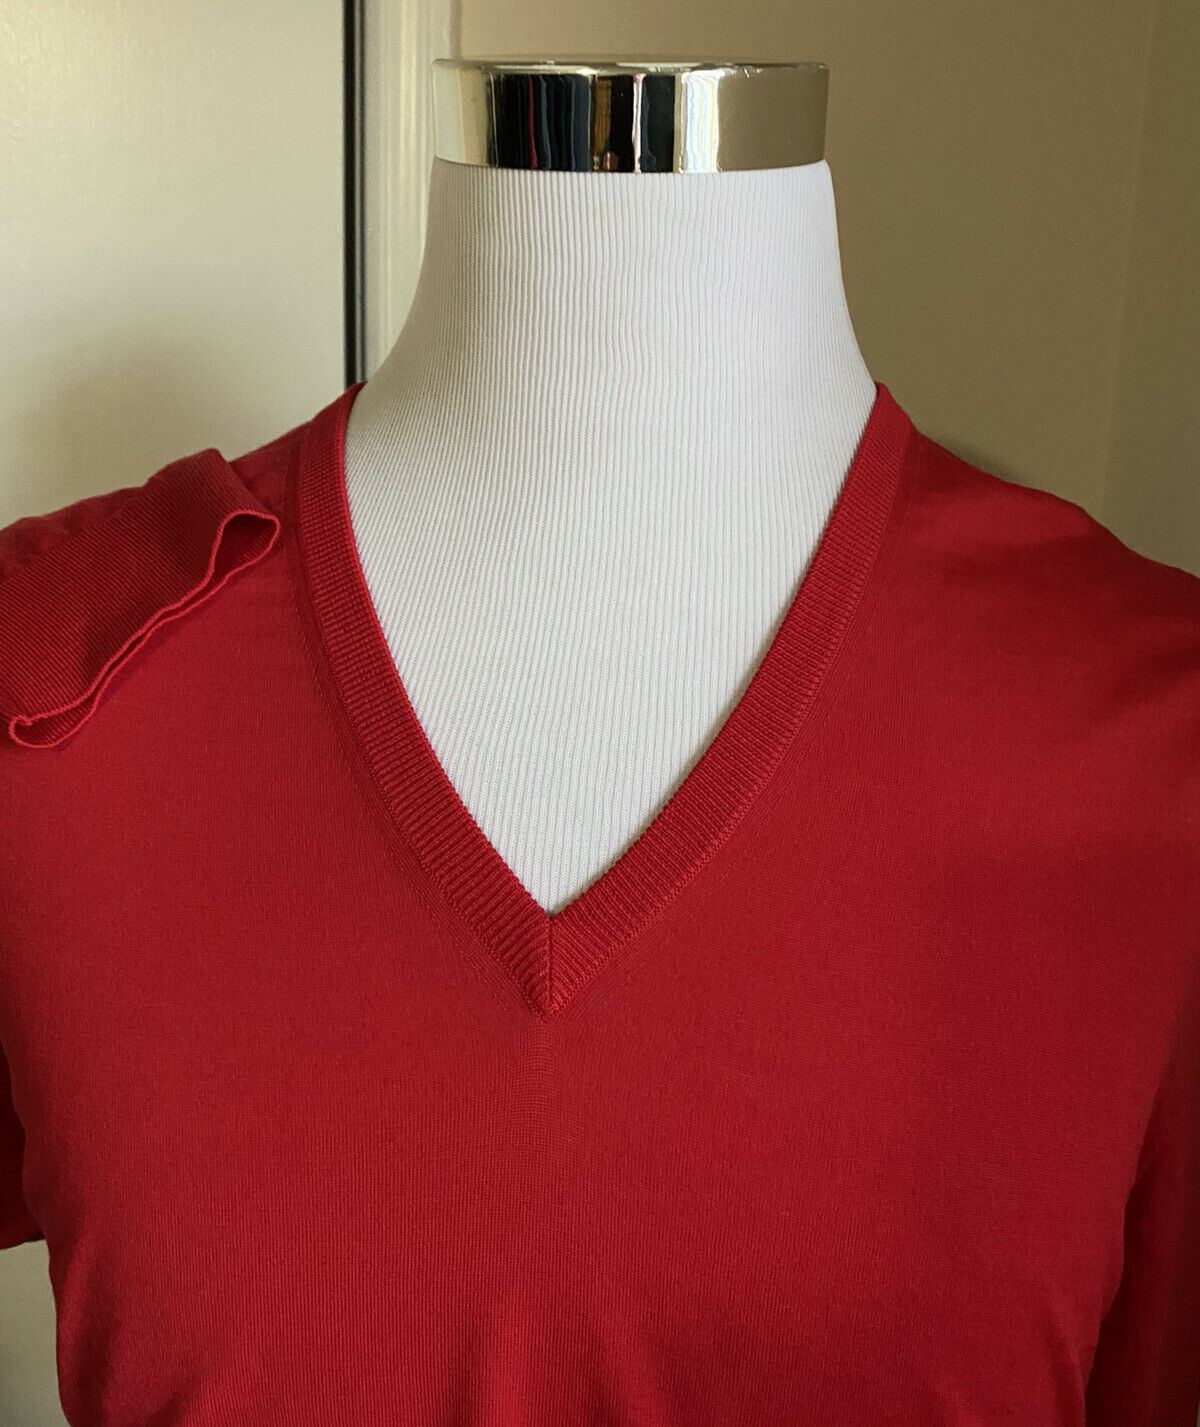 NWT $1200 Gucci Men Wool V Neck Sweater Red Size XL Italy